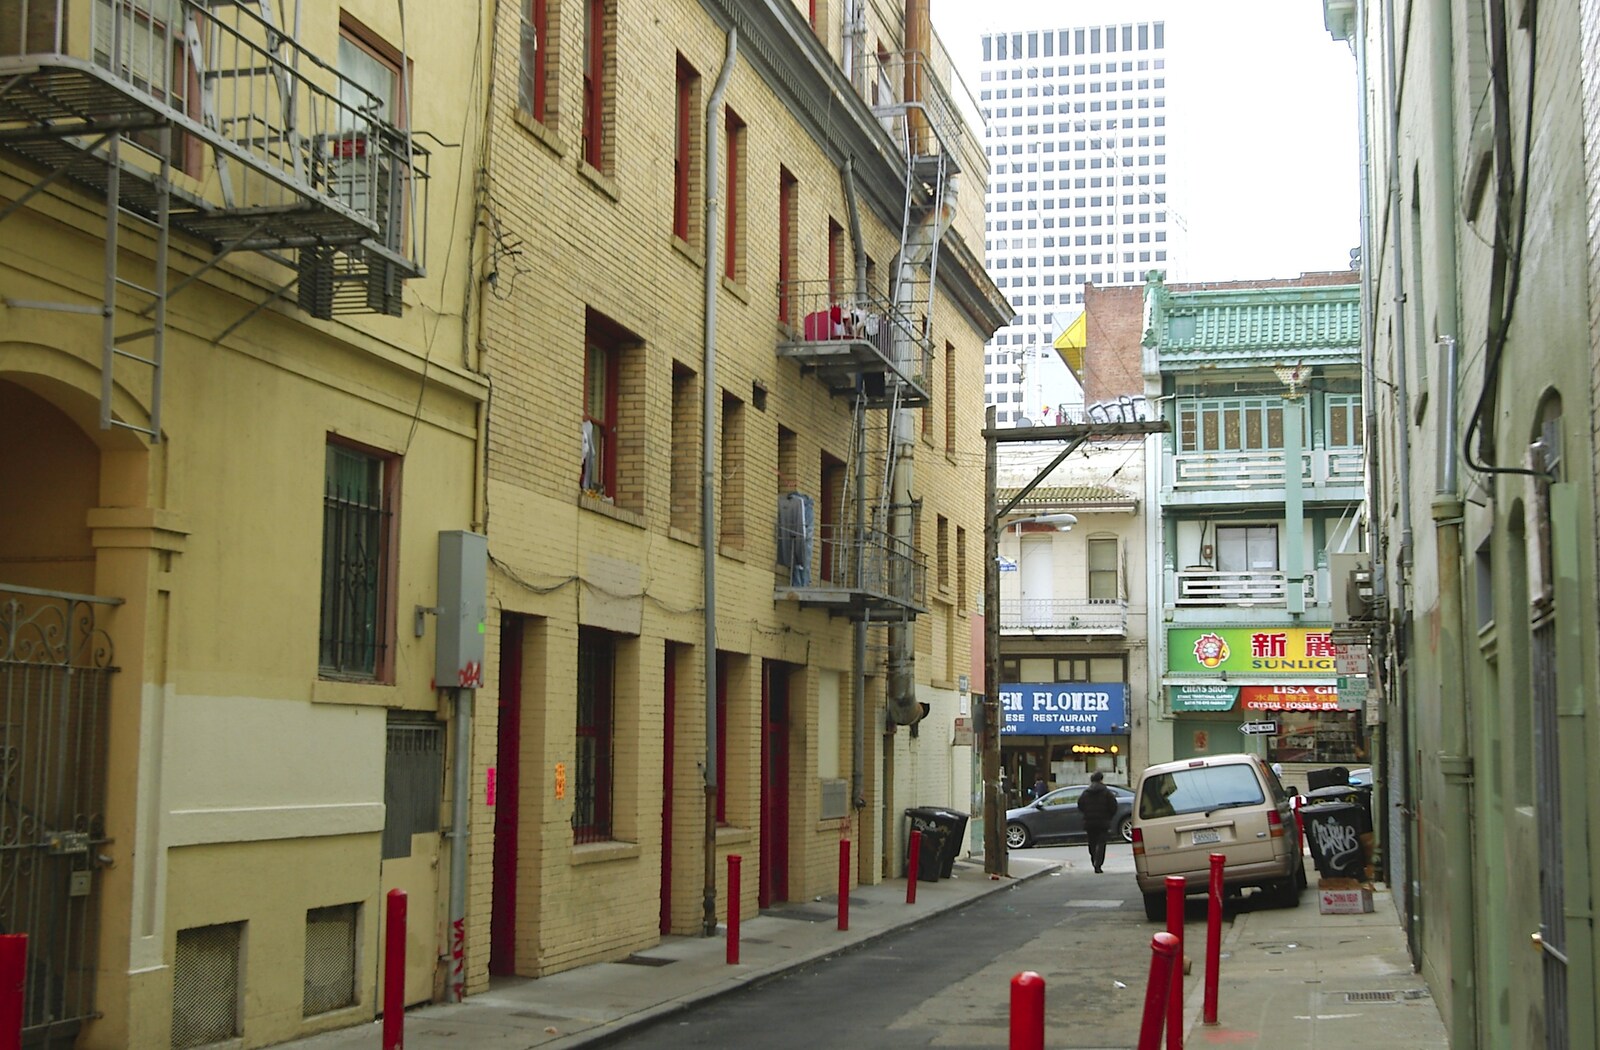 Back-street alleyways from Chinatown, Telegraph Hill and Fisherman's Wharf, San Francisco, California, US - 11th March 2006